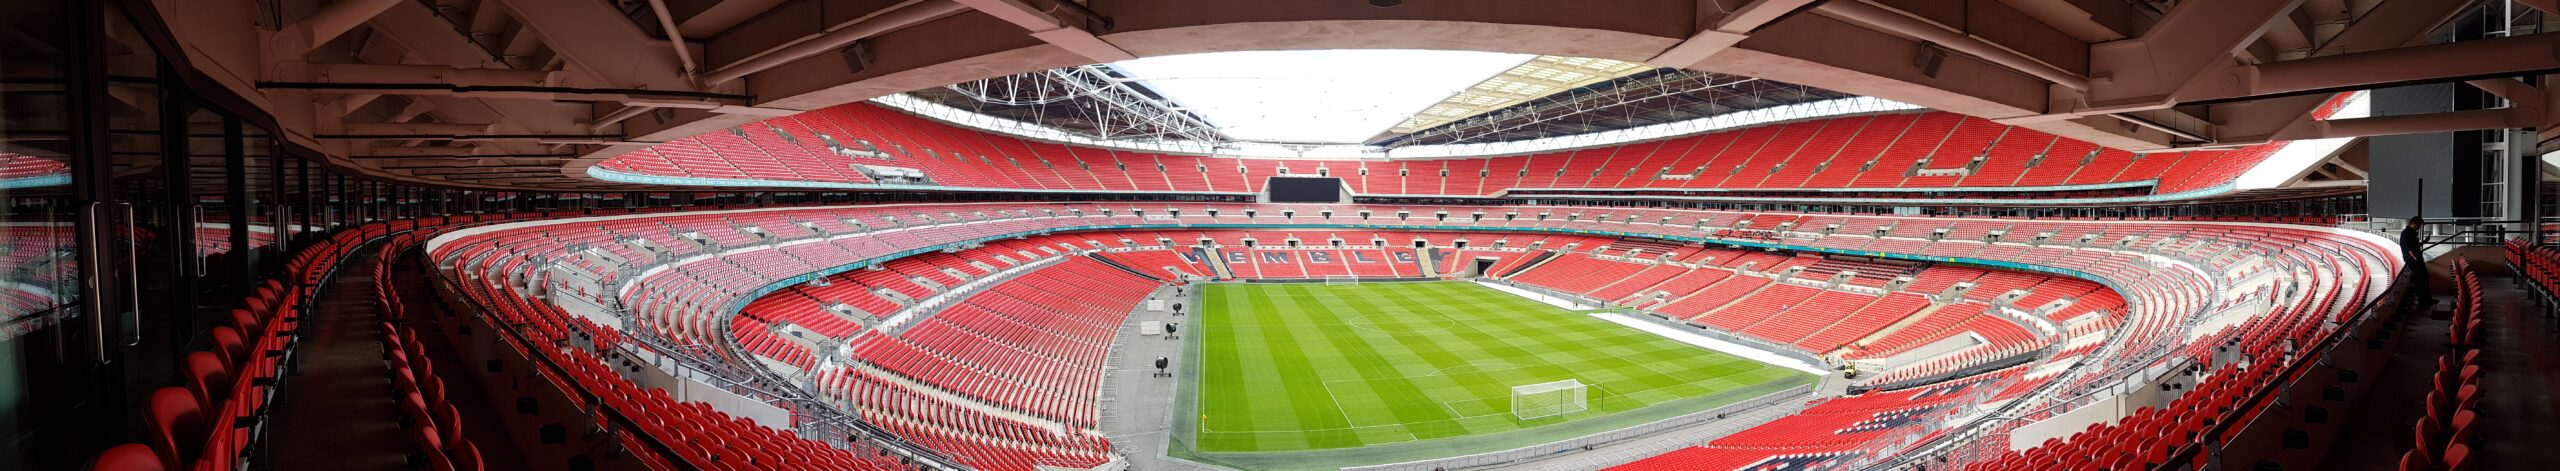 View from inside Wembley Stadium